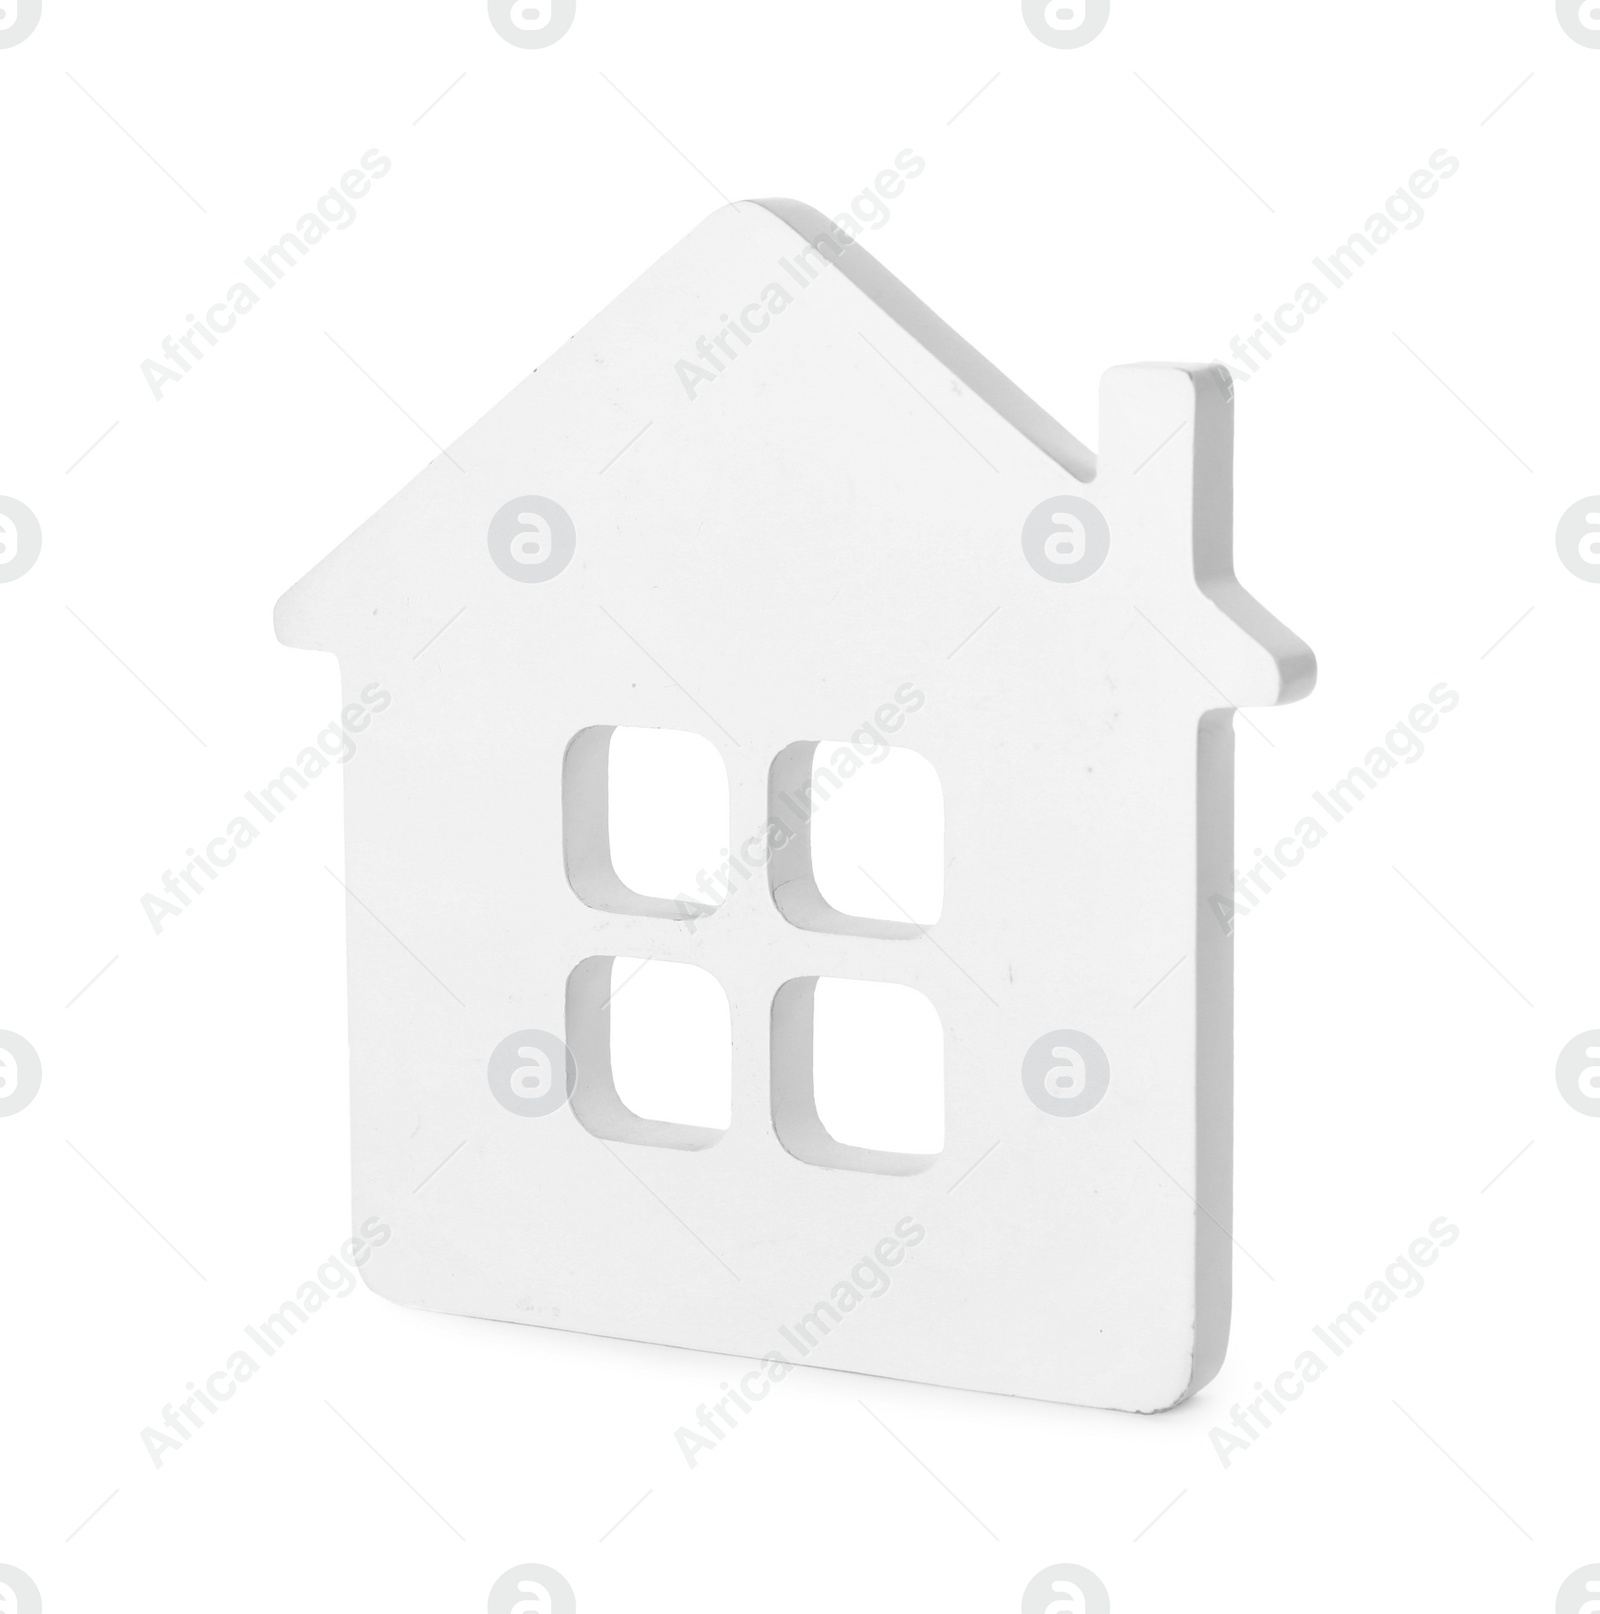 Photo of Small model of house isolated on white